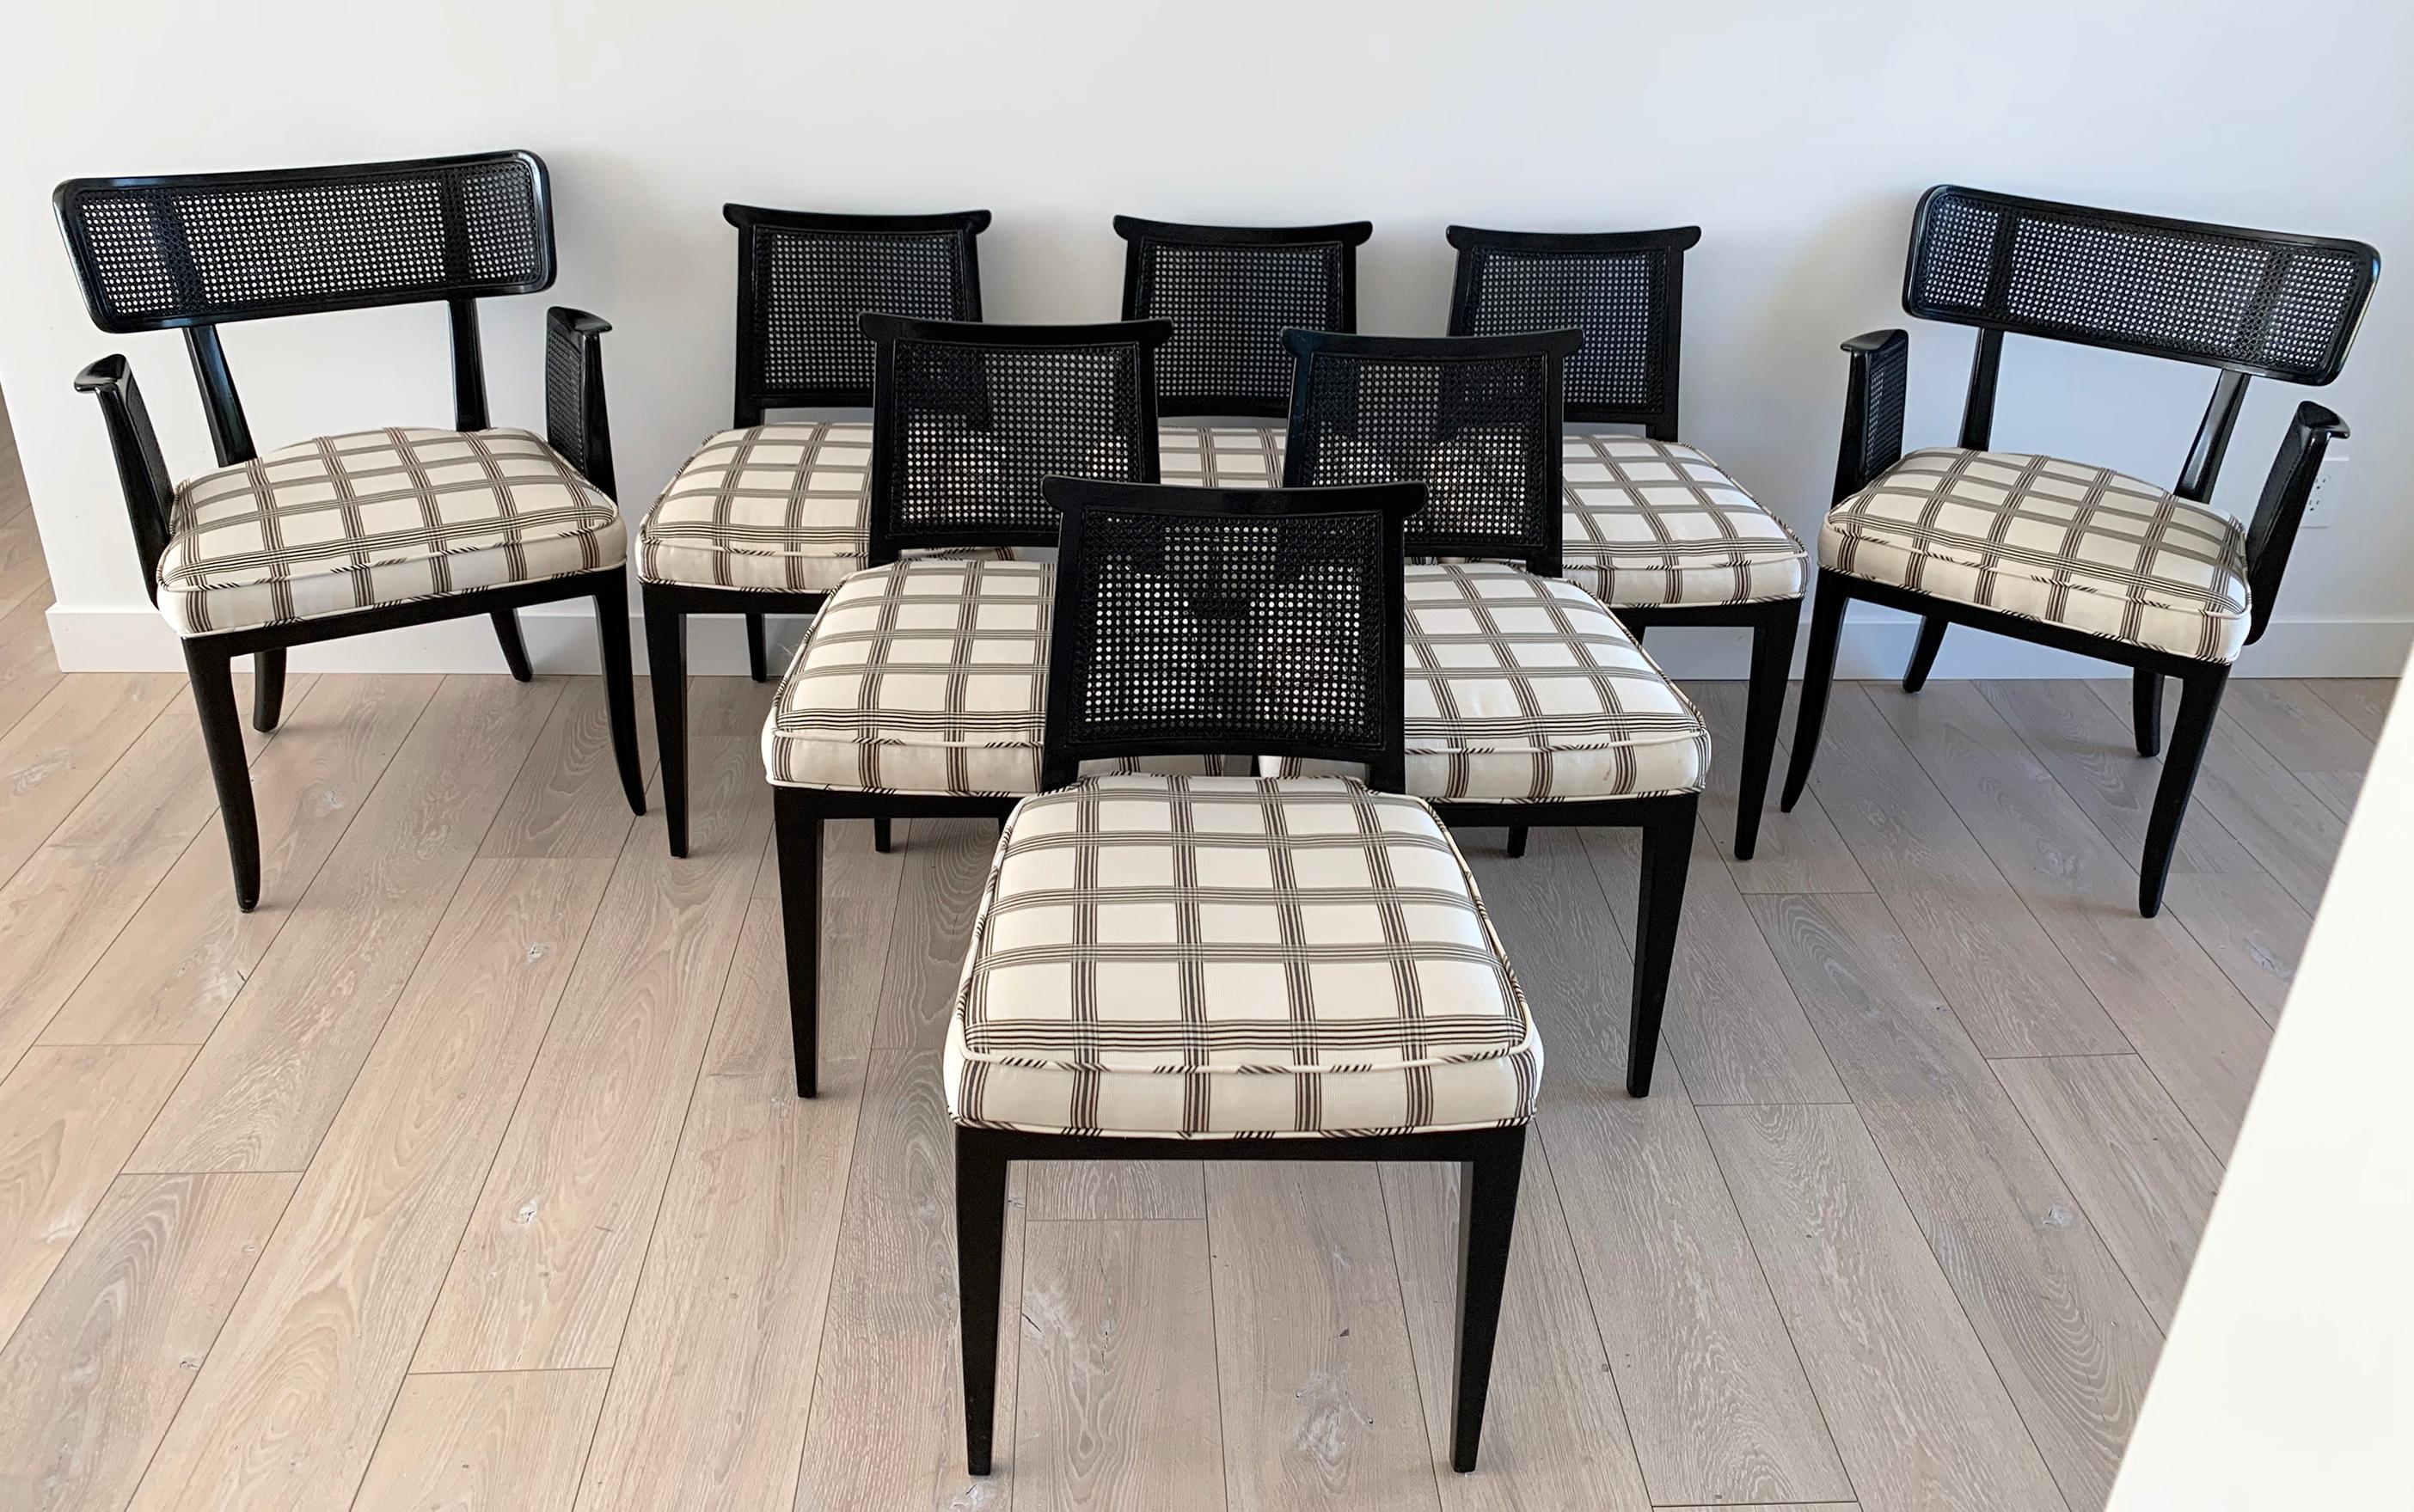 A stunning and increasingly rare set of 8 dining chairs by Edward Wormley for Dunbar. This set of 8 ebonized chairs features 2 model 4580 armchairs and 6 model 4632 side chairs. This incredible set came out of an estate in Beverly Hills from their